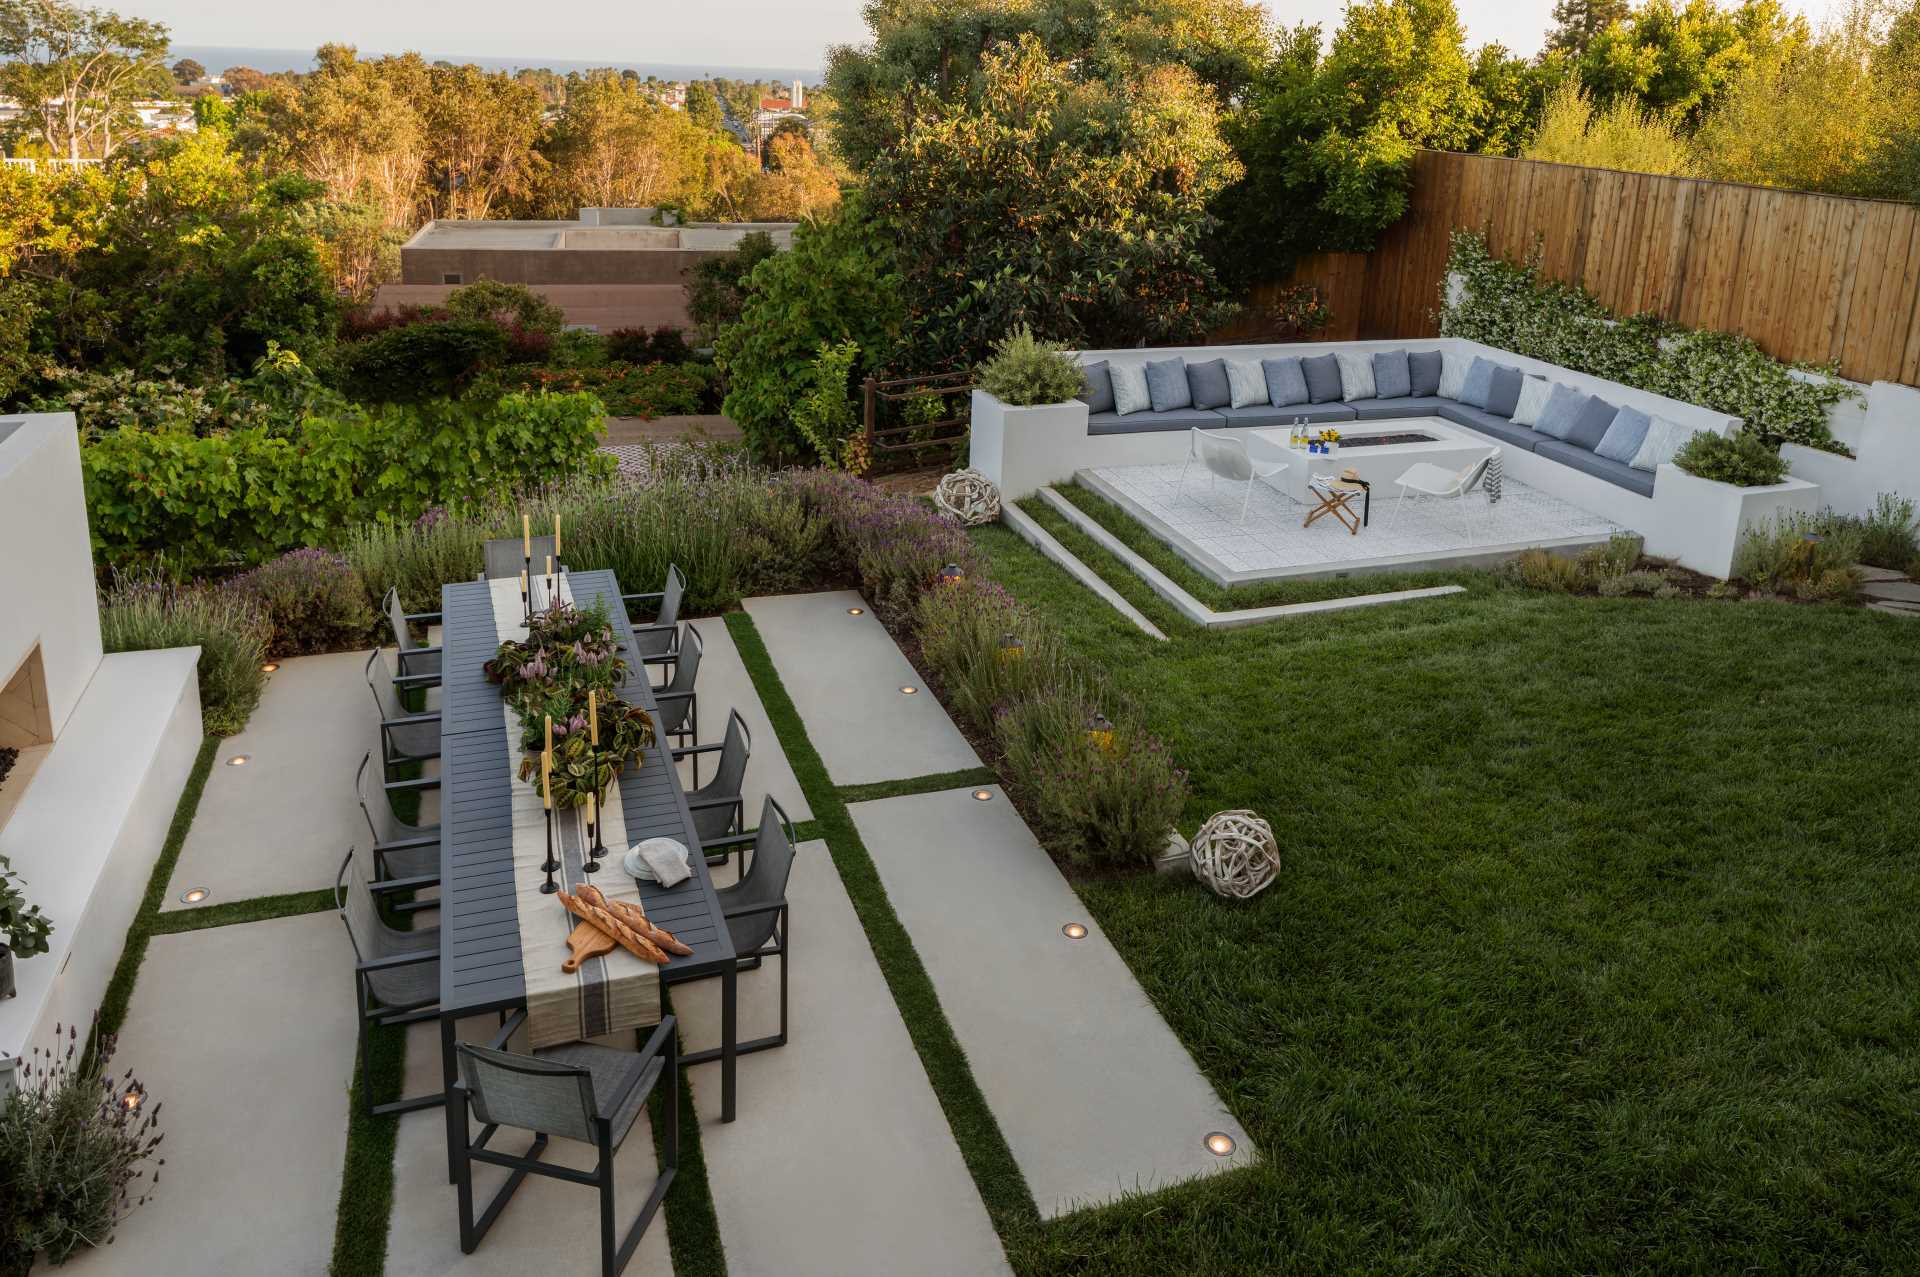 A modern landscaped yard with seating area, alfresco dining, and kitchen garden.